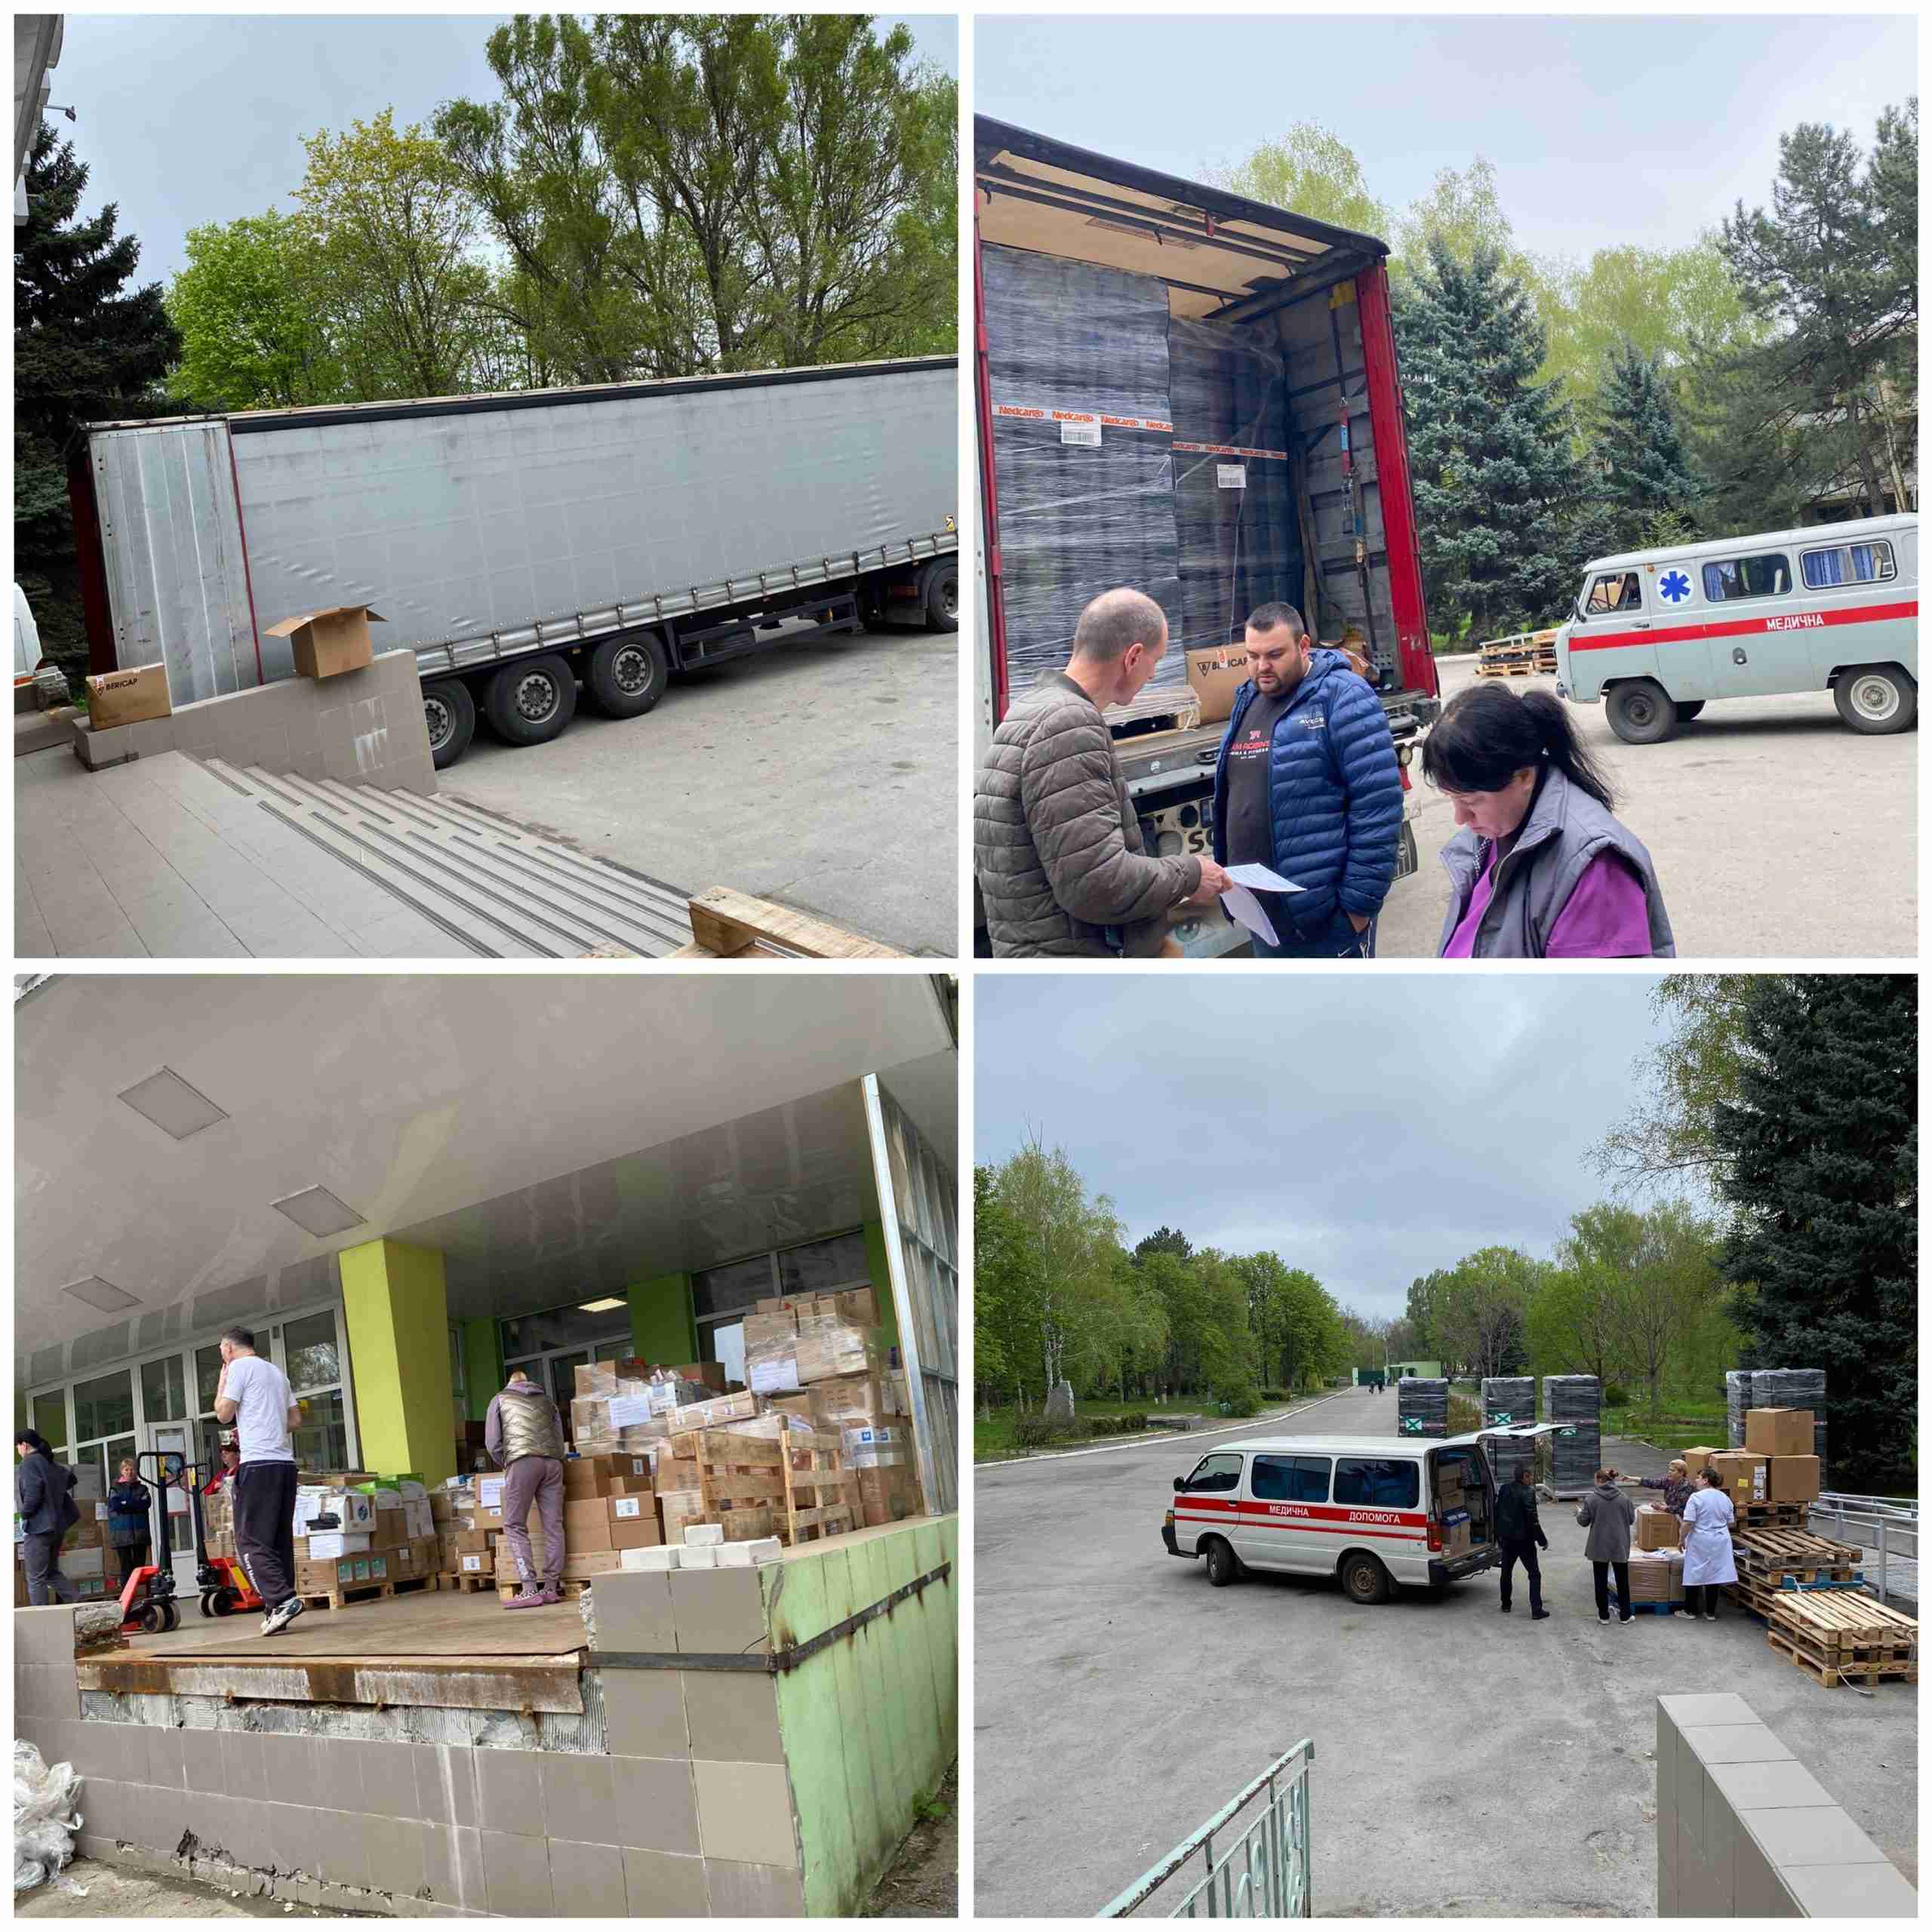 Delivering truck #10 with Imres medical kits to the hospital in Dnipro.